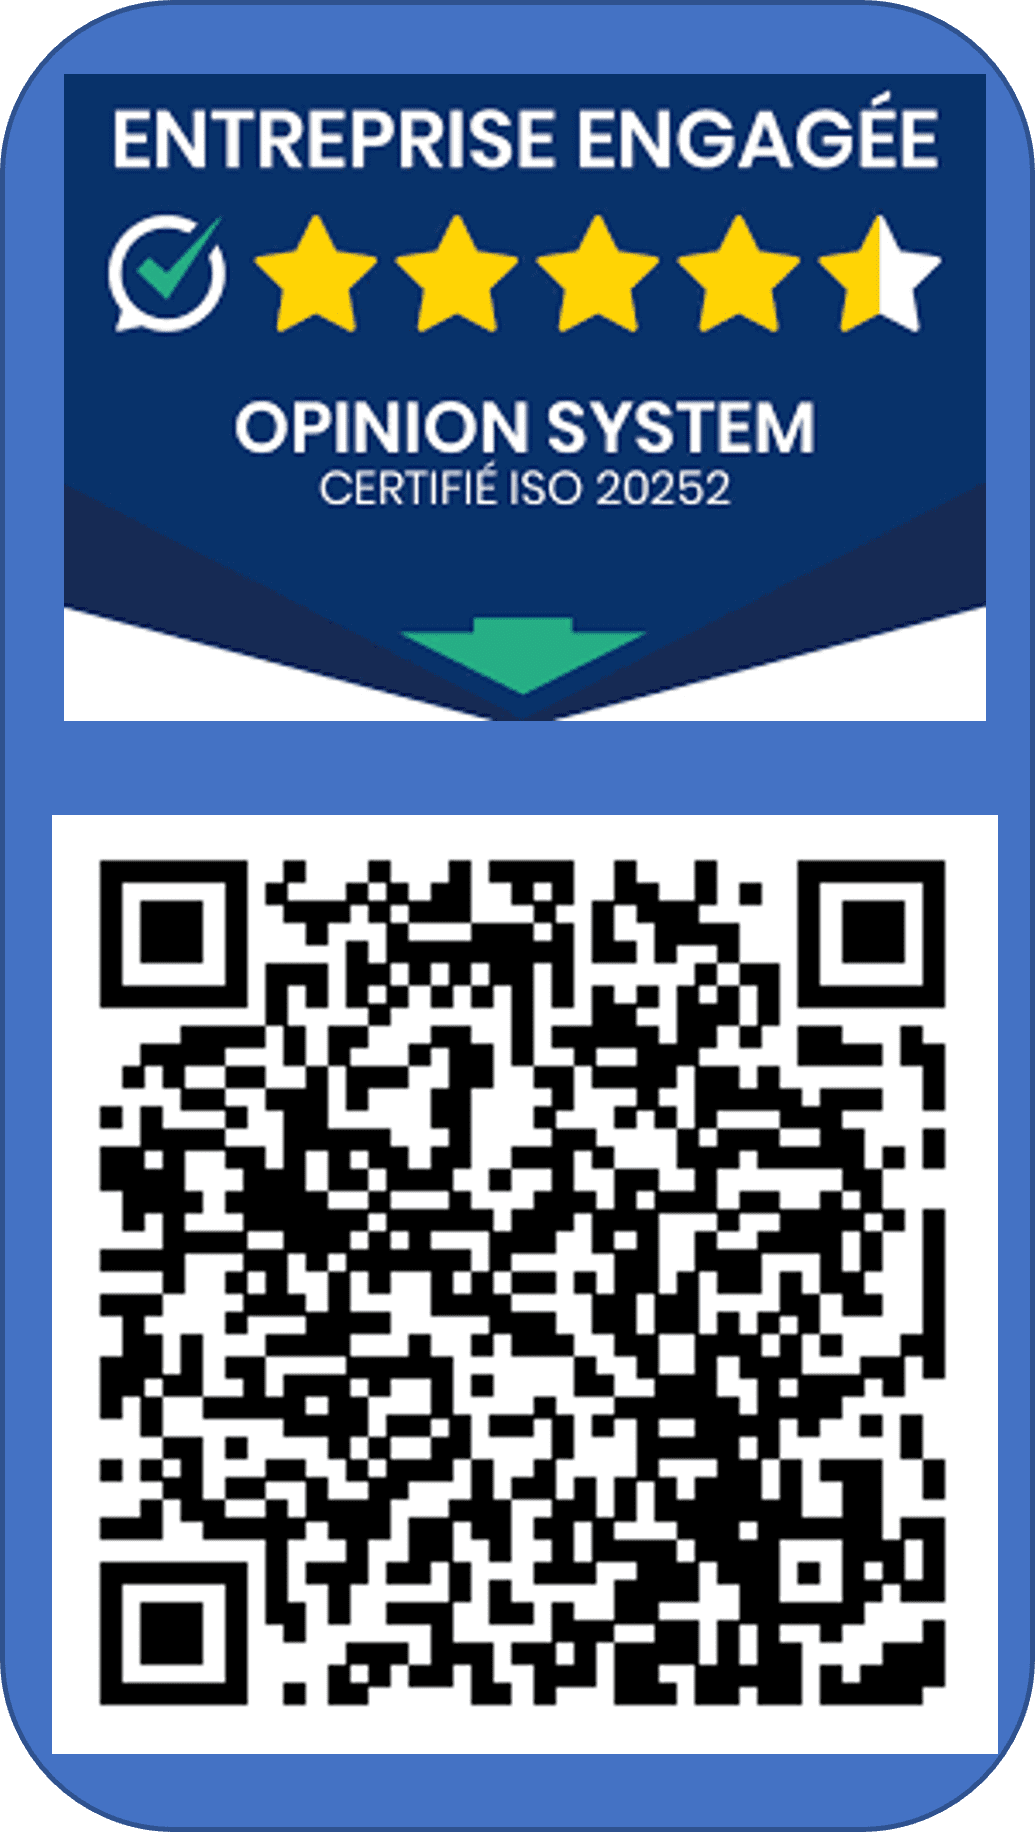 OPINION SYSTEM